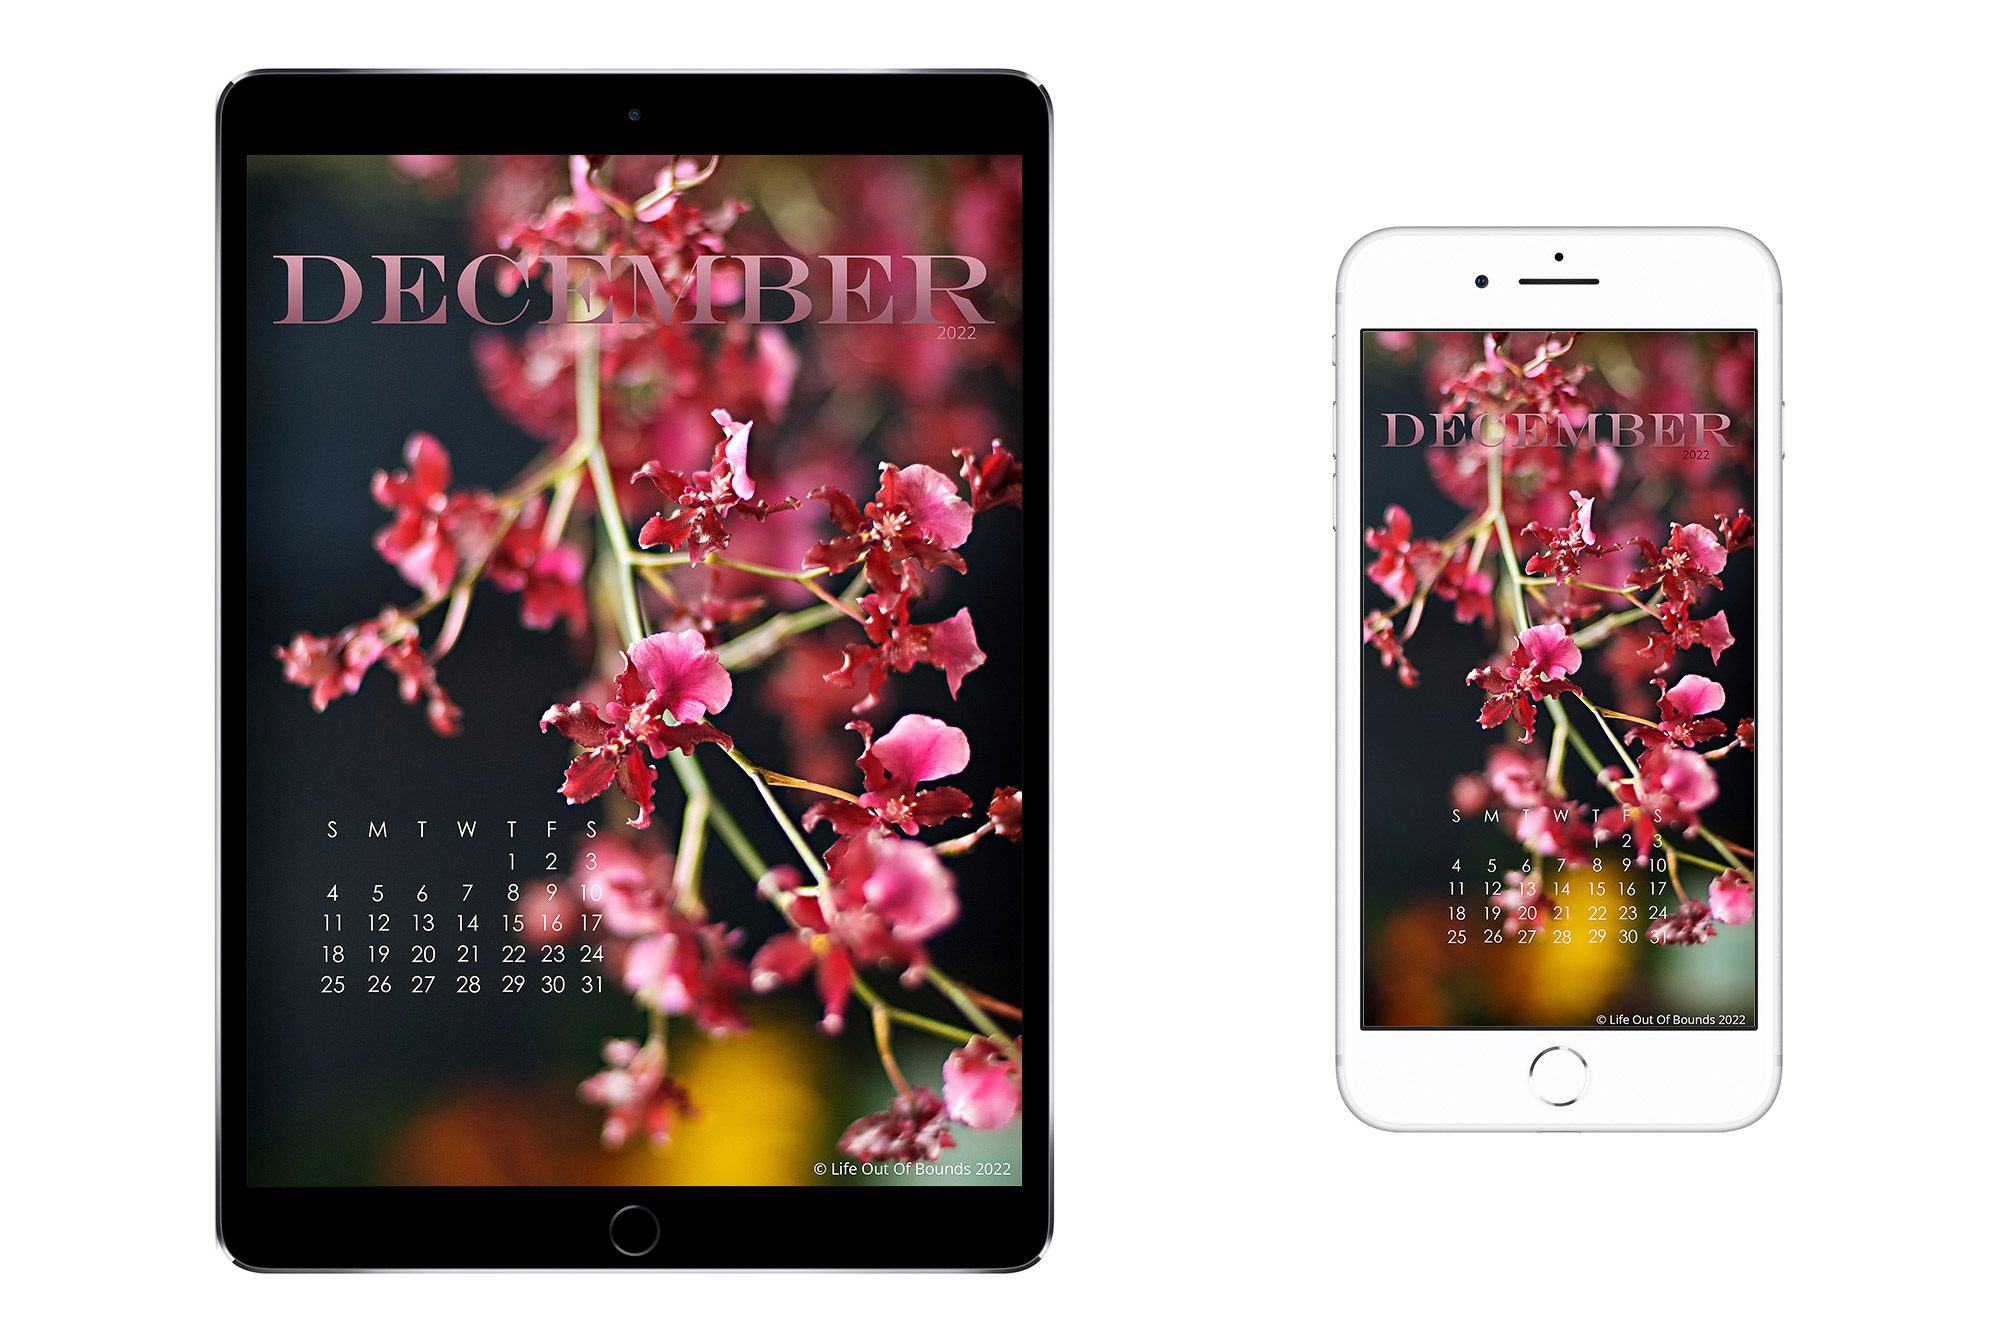 December-22-free-calendar-wallpaper-for-iPad-tablet-iPhone-and-smartphone